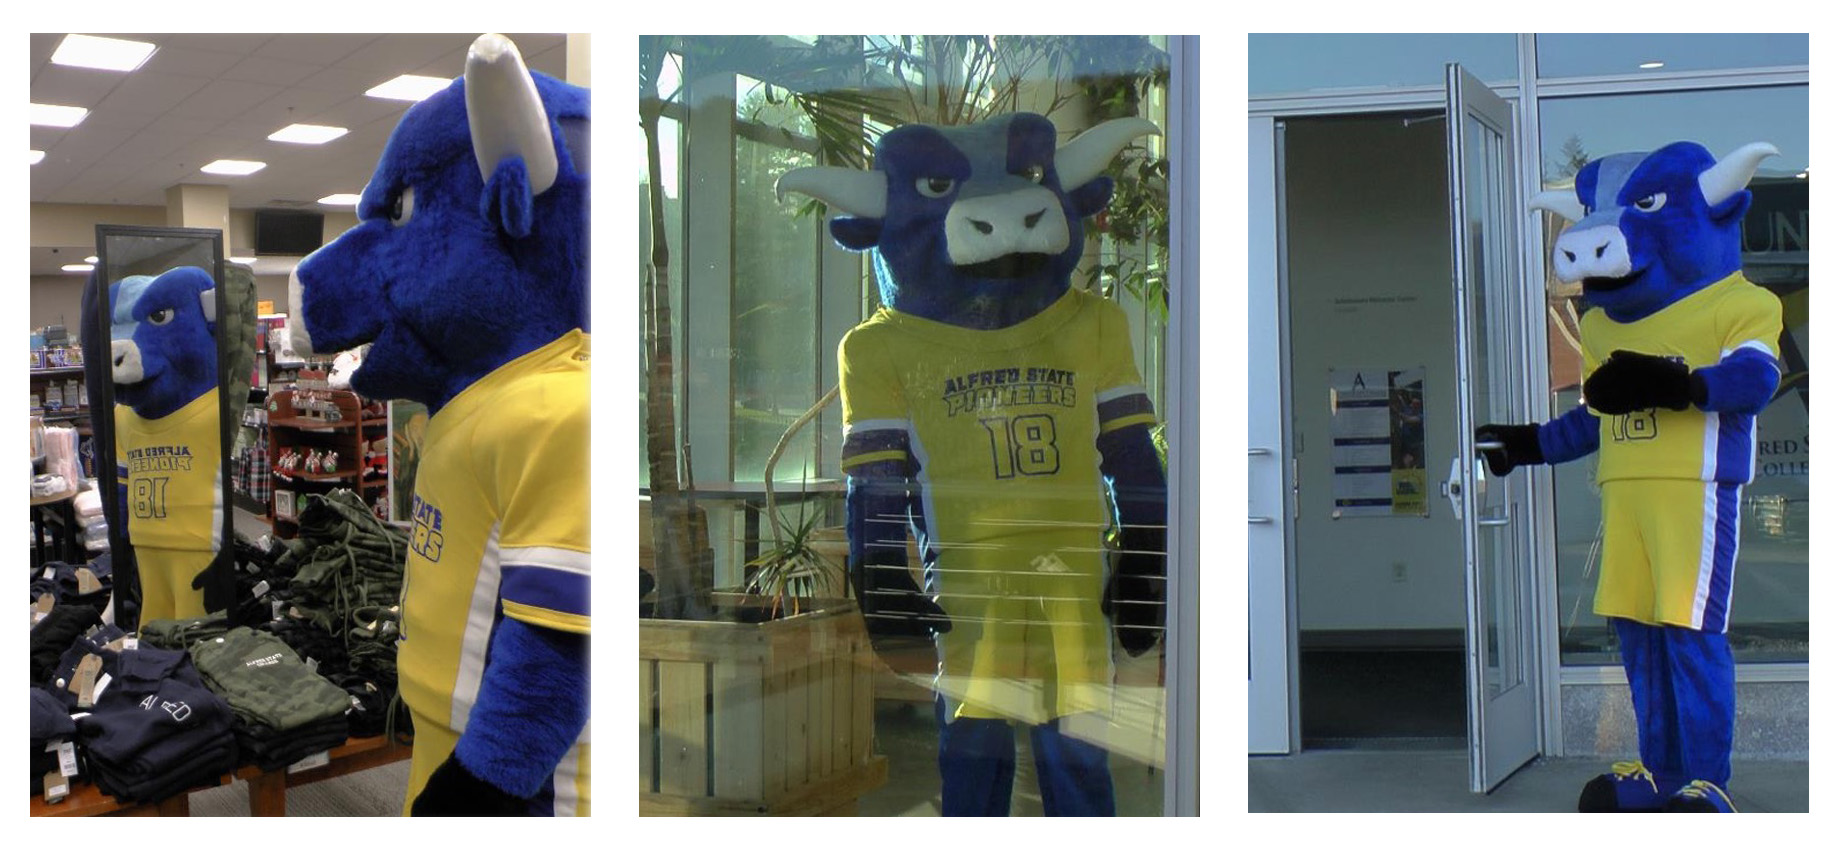 Alfred State Pioneers’ mascot Big Blue helped illustrate the importance of reflecting, evaluating surroundings, and then taking action with mirrors, windows, and doors.